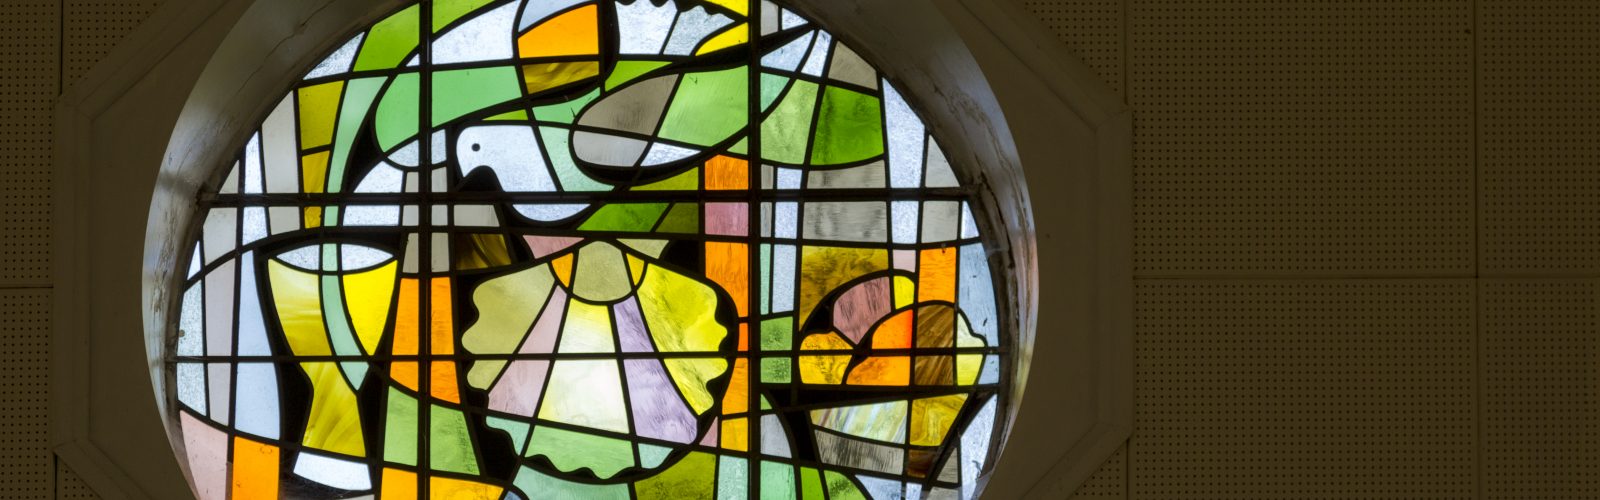 Stained glass window with dove